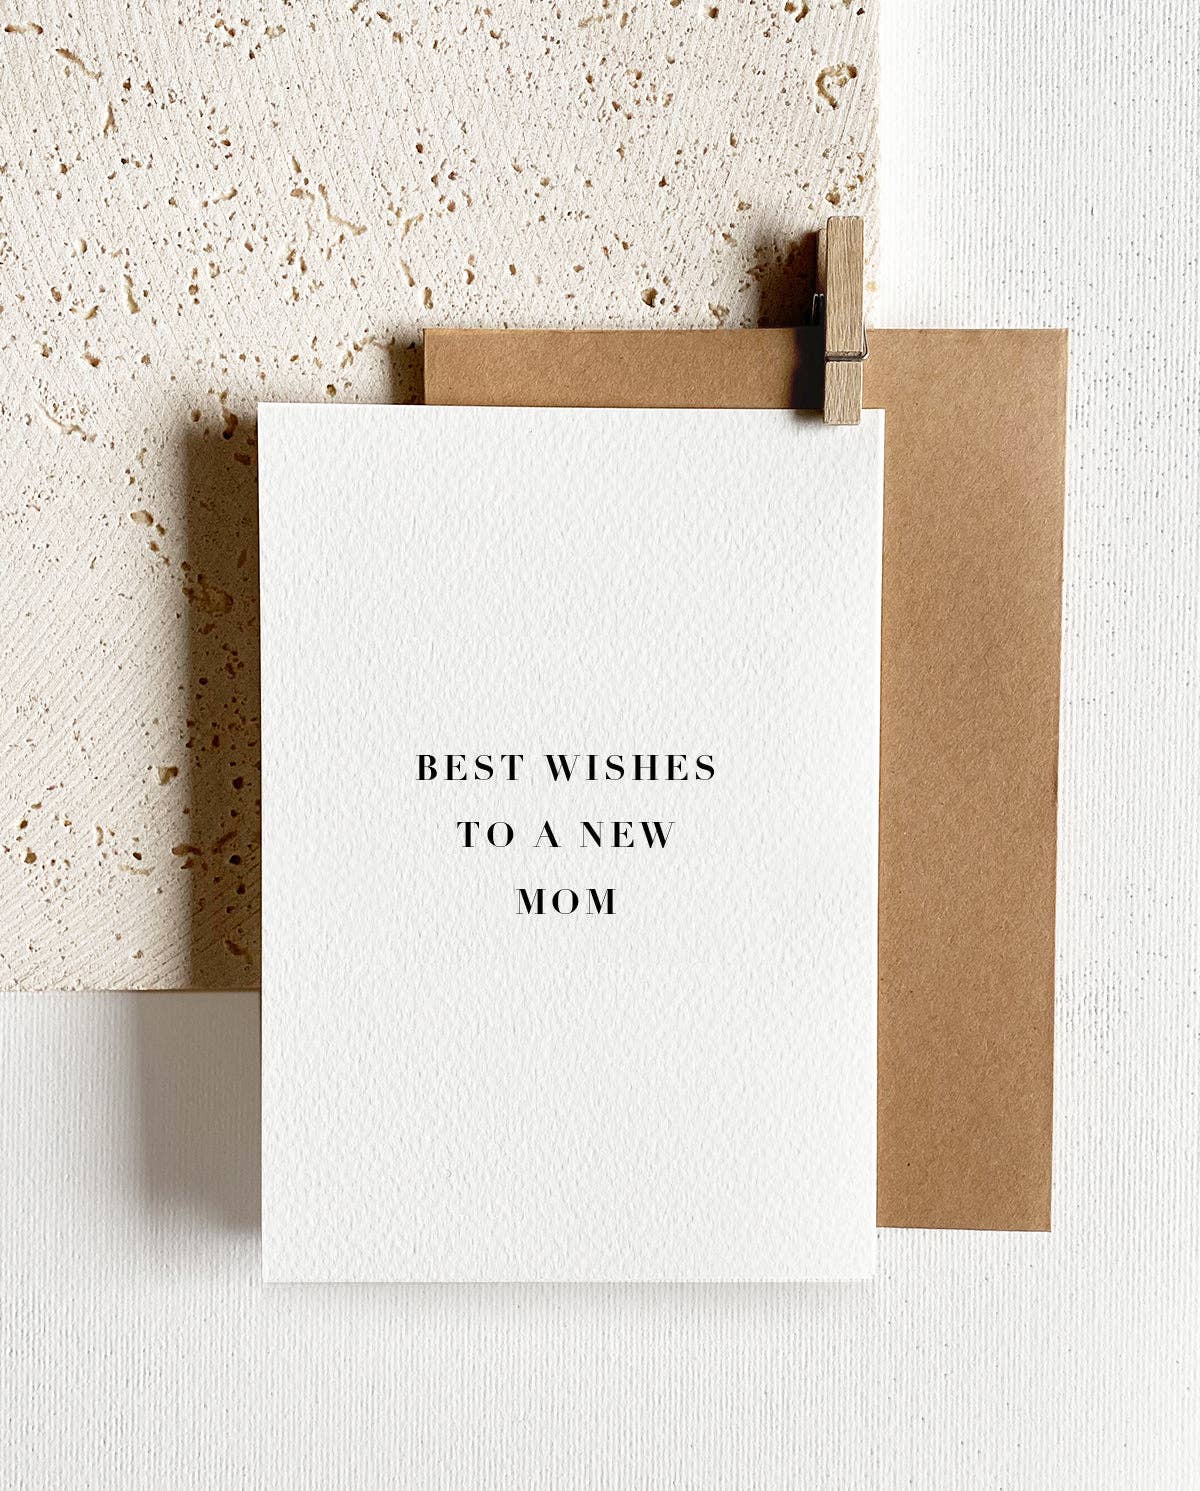 Greeting card - best wishes mom